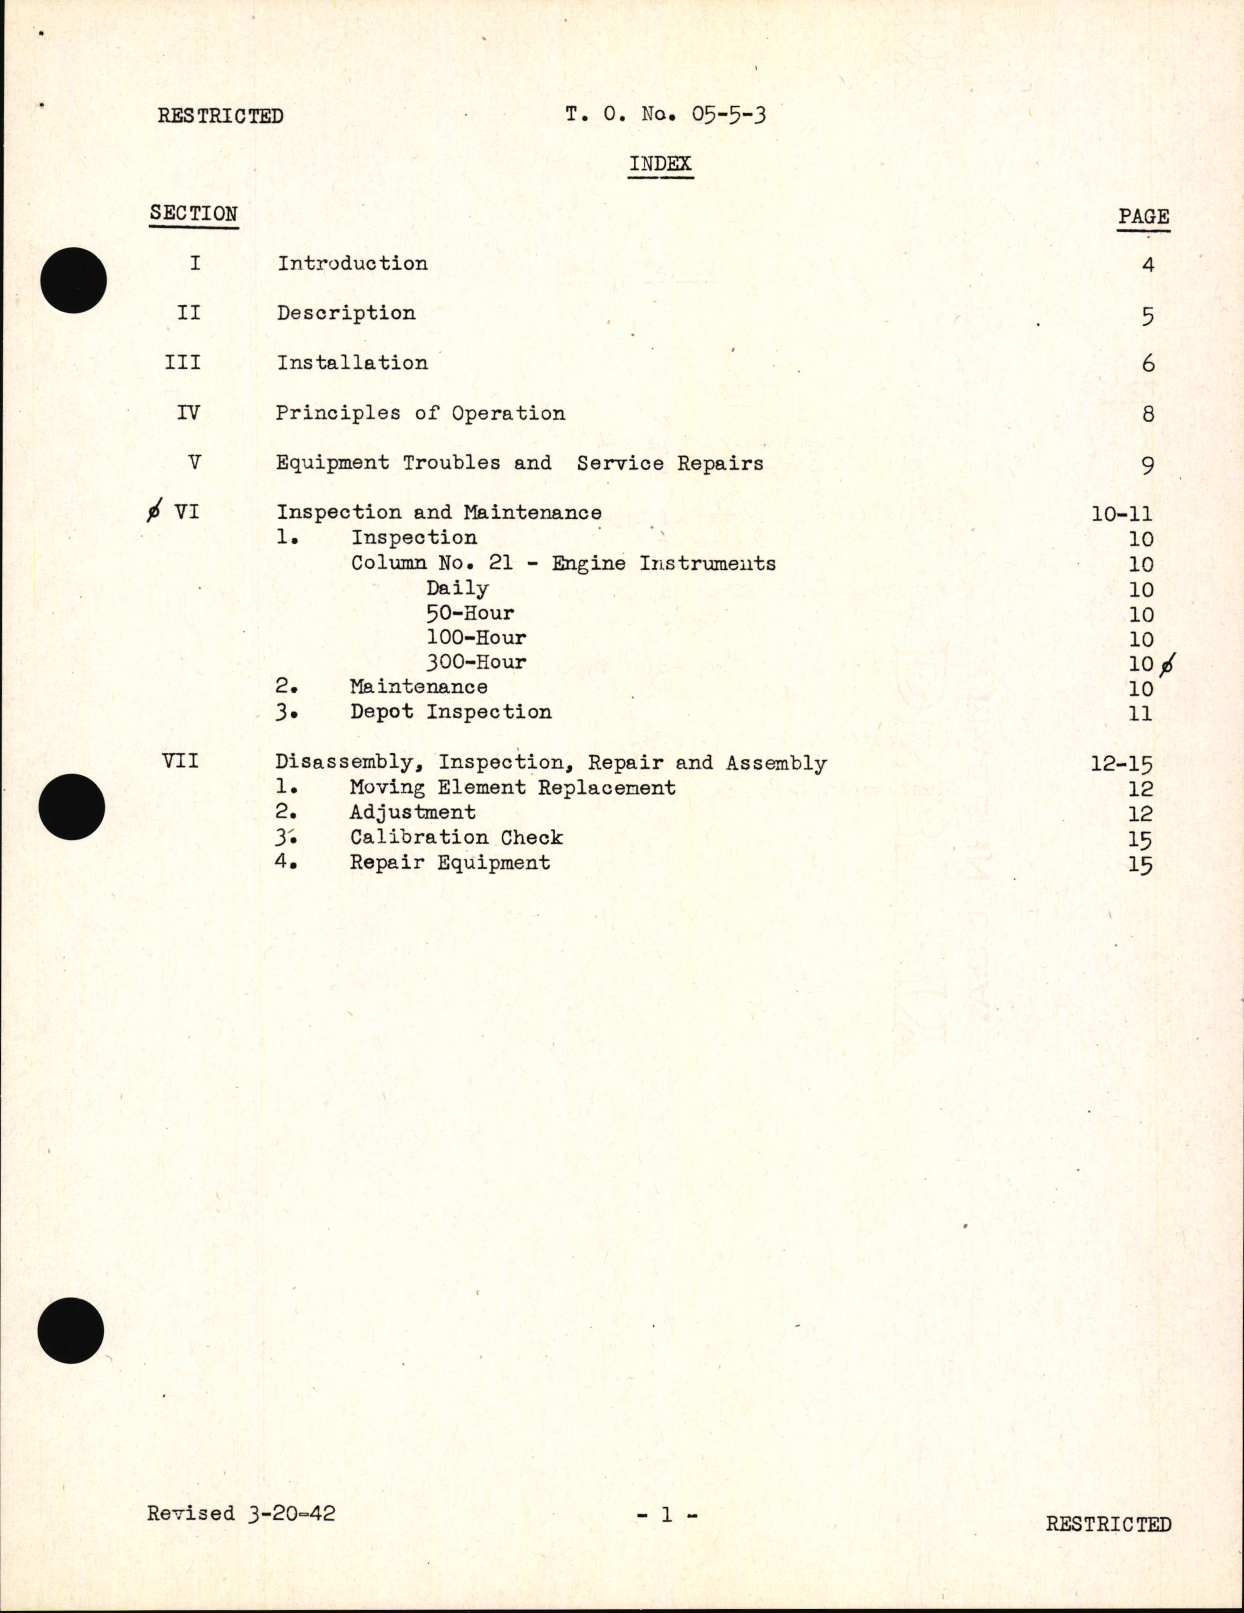 Sample page 5 from AirCorps Library document: Handbook of Instructions with Parts Catalog for Type A-4 Synchronism Indicator